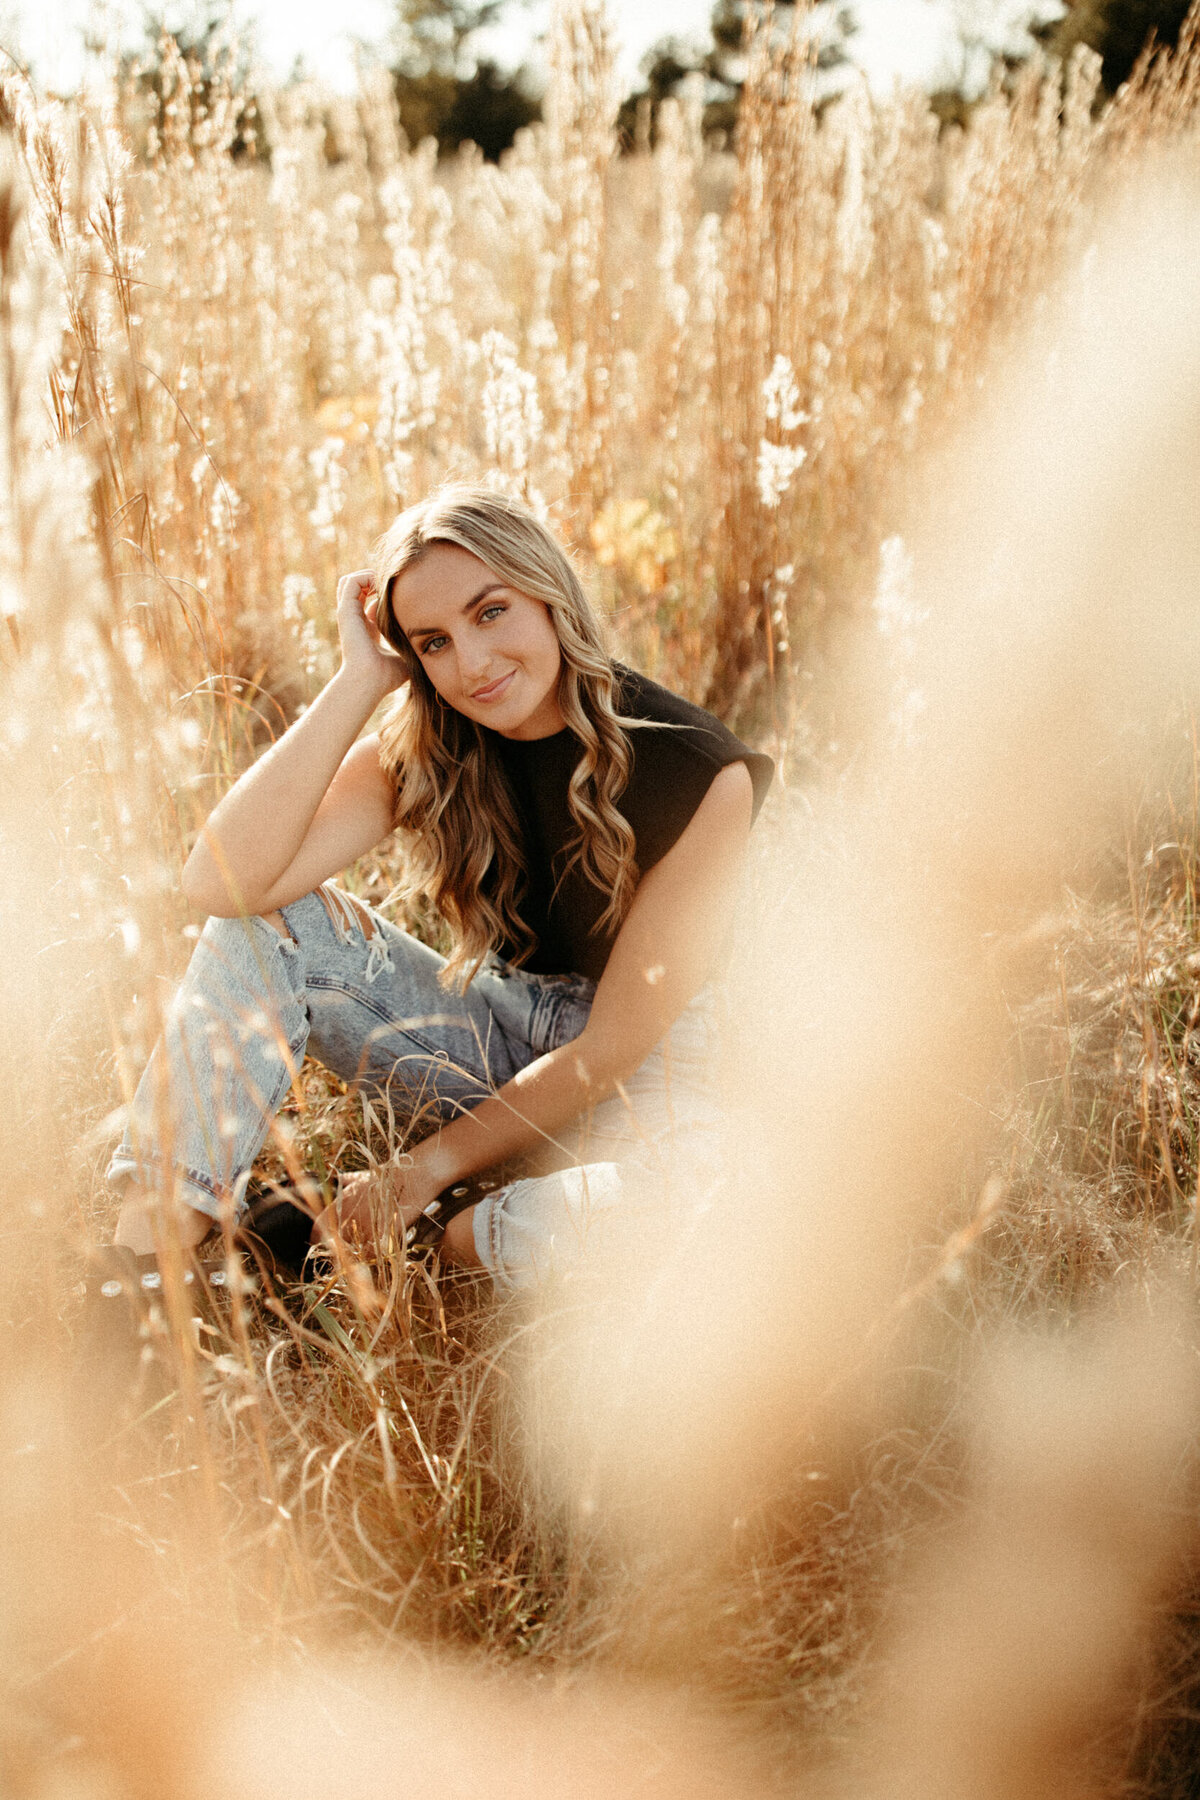 High school senior girl sitting in a field with tall grass and pampas grass